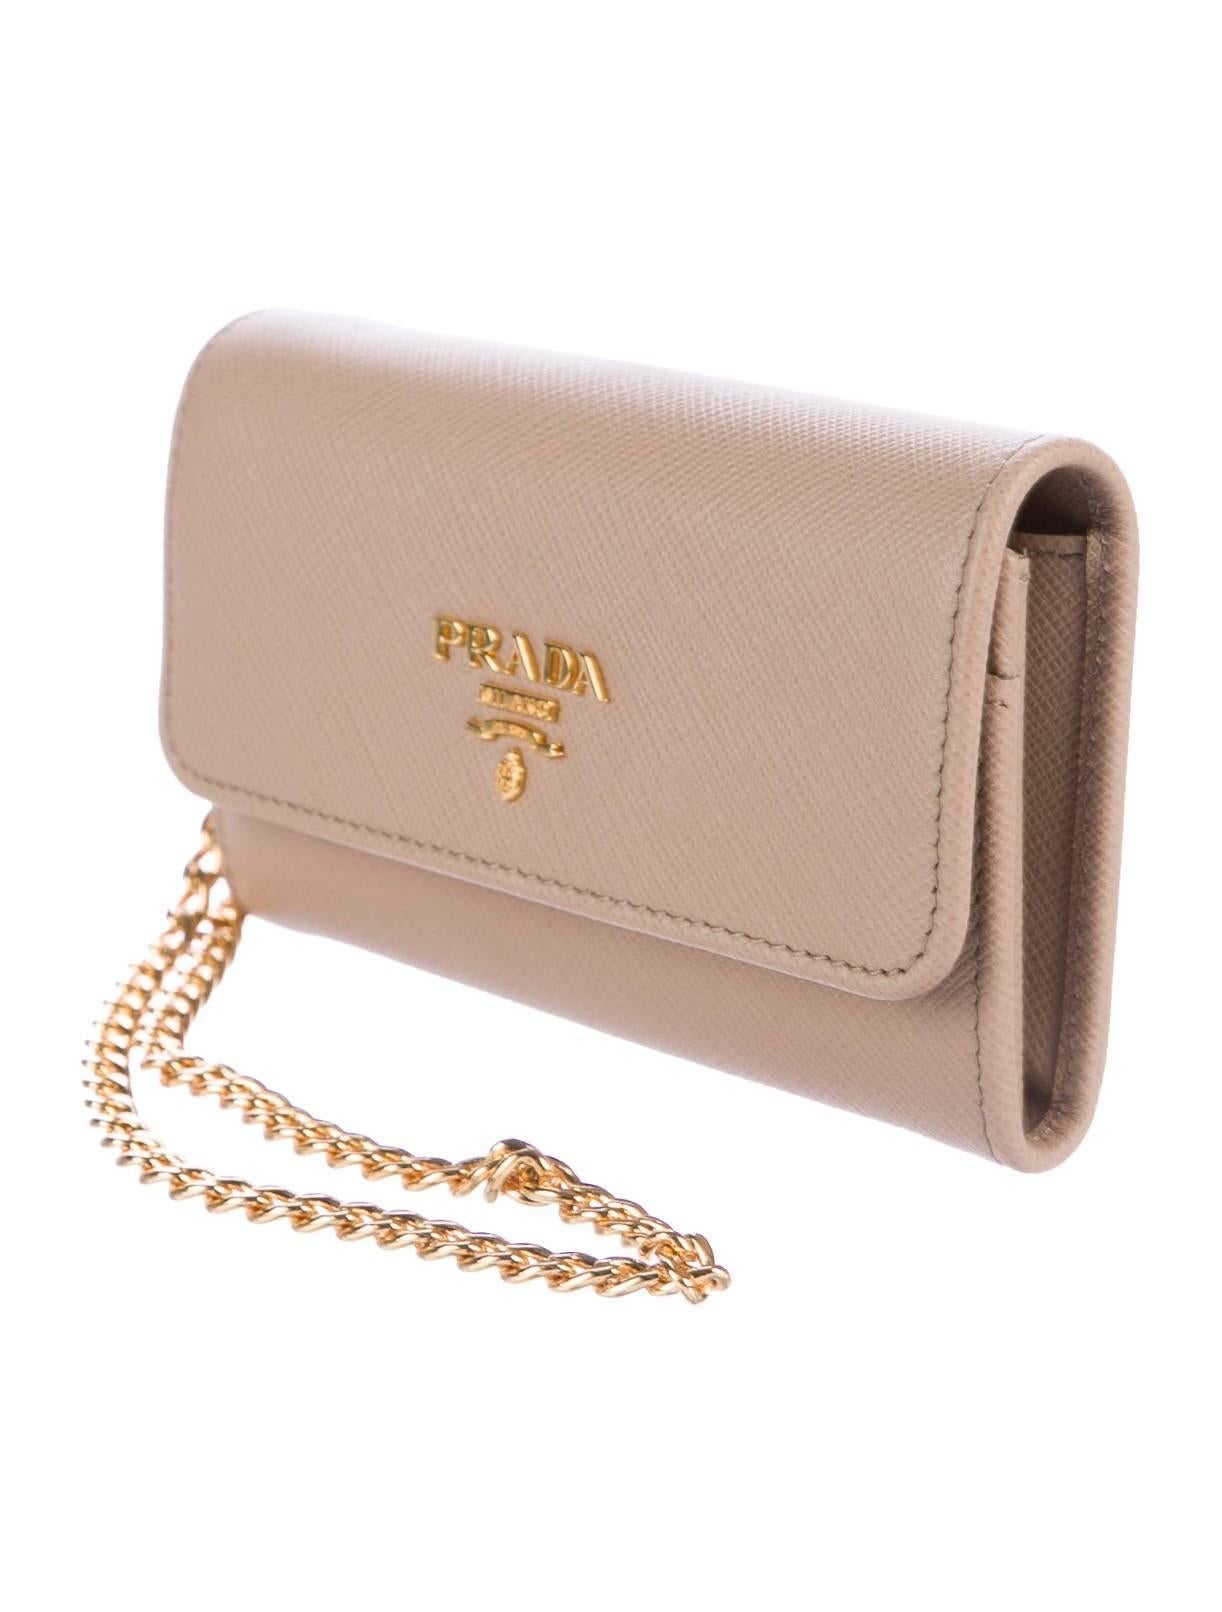 CURATOR'S NOTES

Prada New Nude Leather Gold 2 in 1 Wallet on Chain WOC Clutch Flap Bag in Box

Leather
Gold tone hardware
Snap closure
Leather lining
Features three card slots 
Measures 5.25